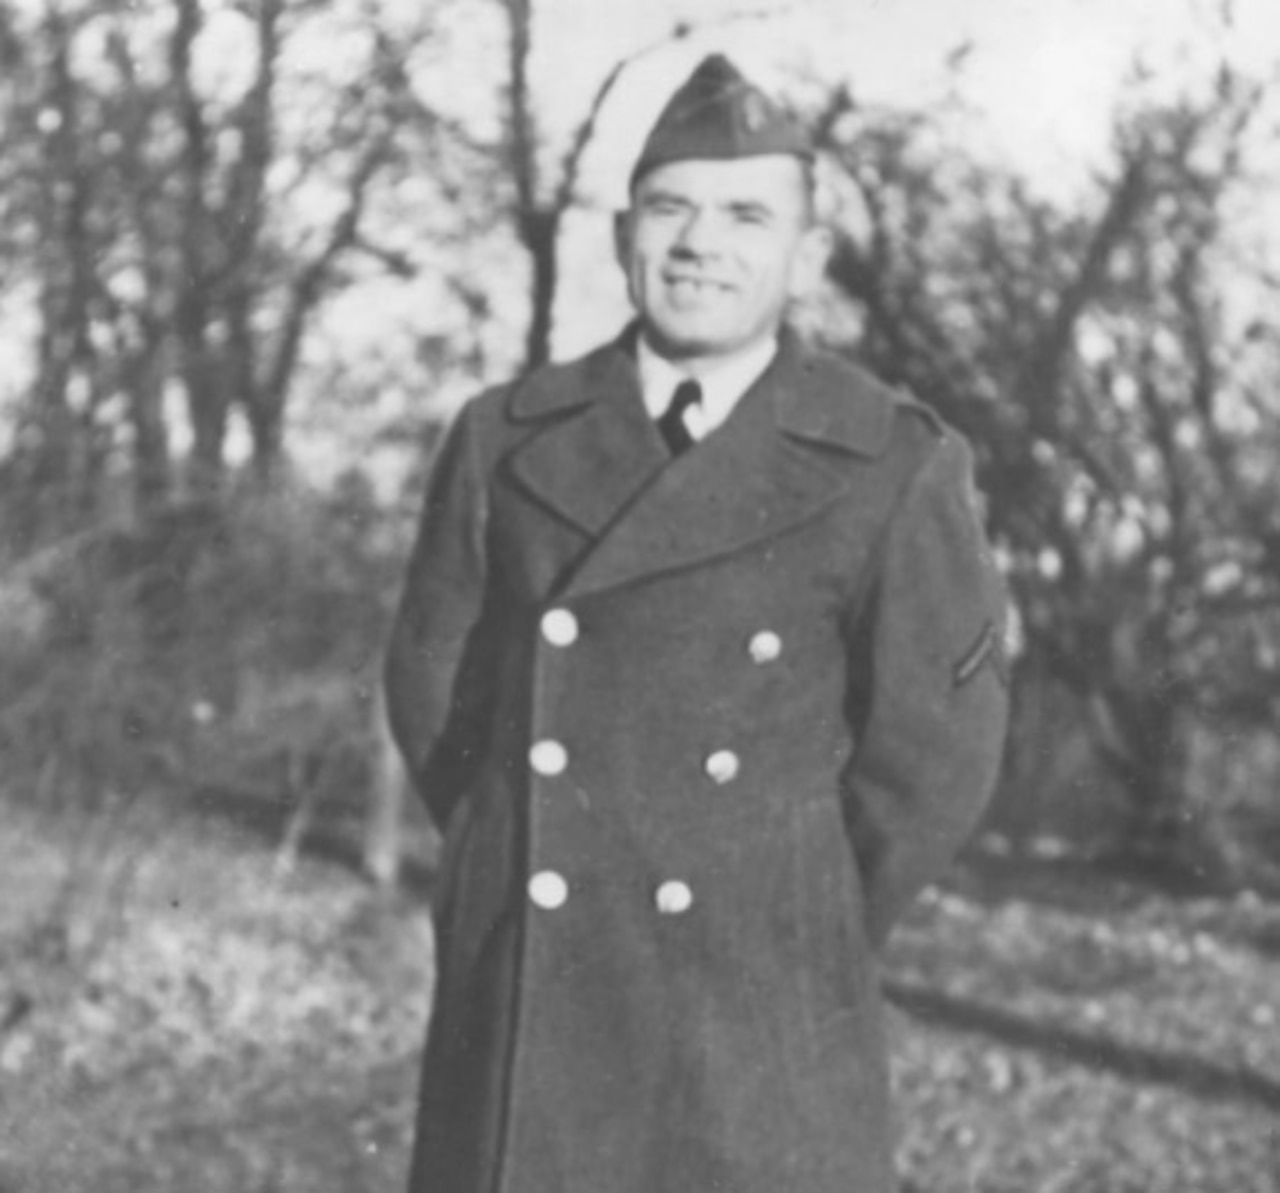 A man wearing a peacoat and military cap smiles with his hands behind his back.